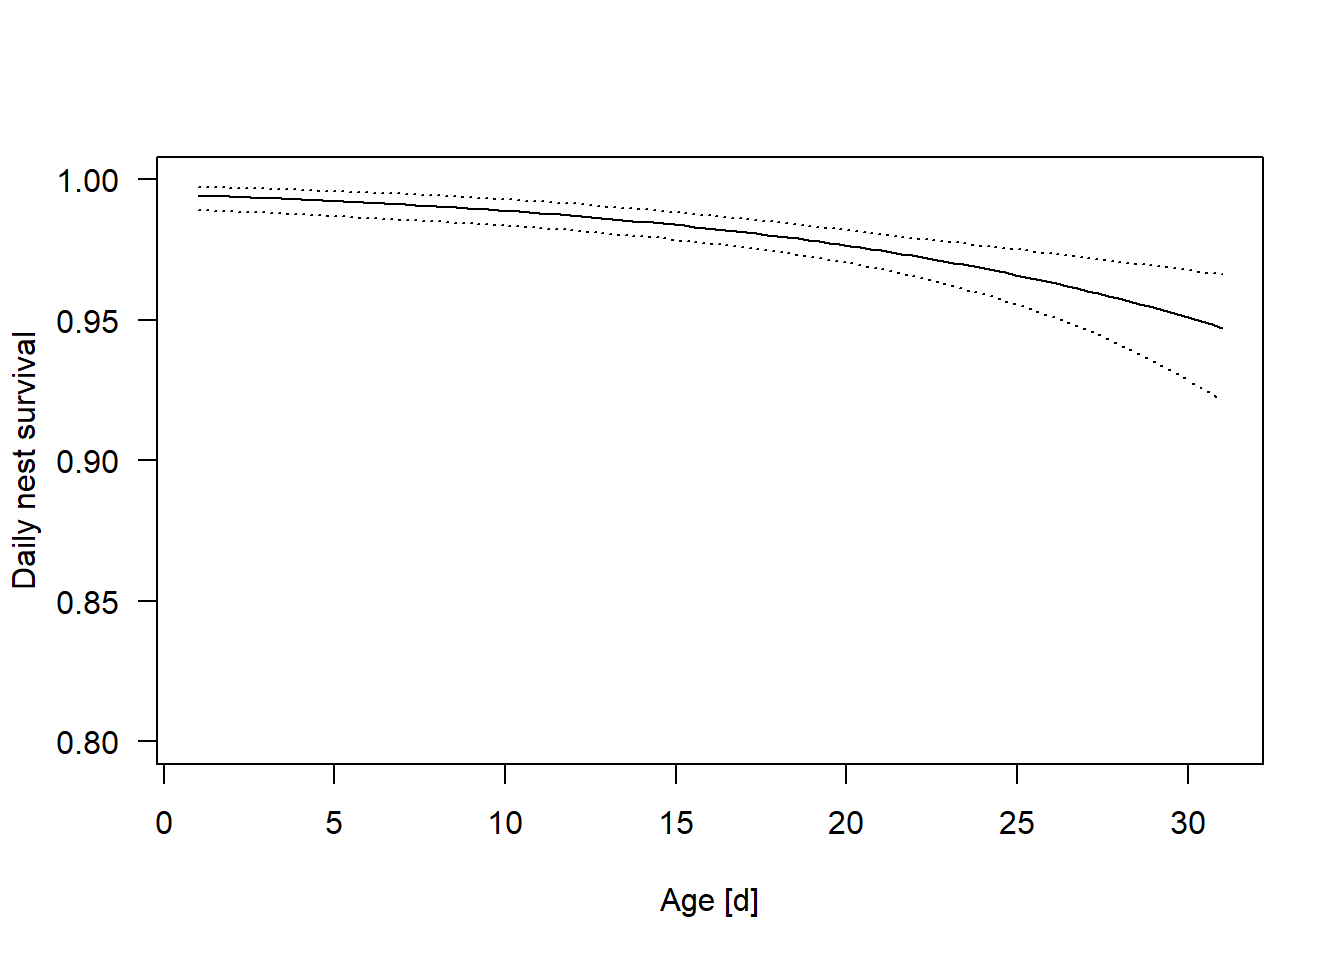 Estimated daily nest survival probability in relation to nest age. Dotted lines are 95% uncertainty intervals of the regression line.